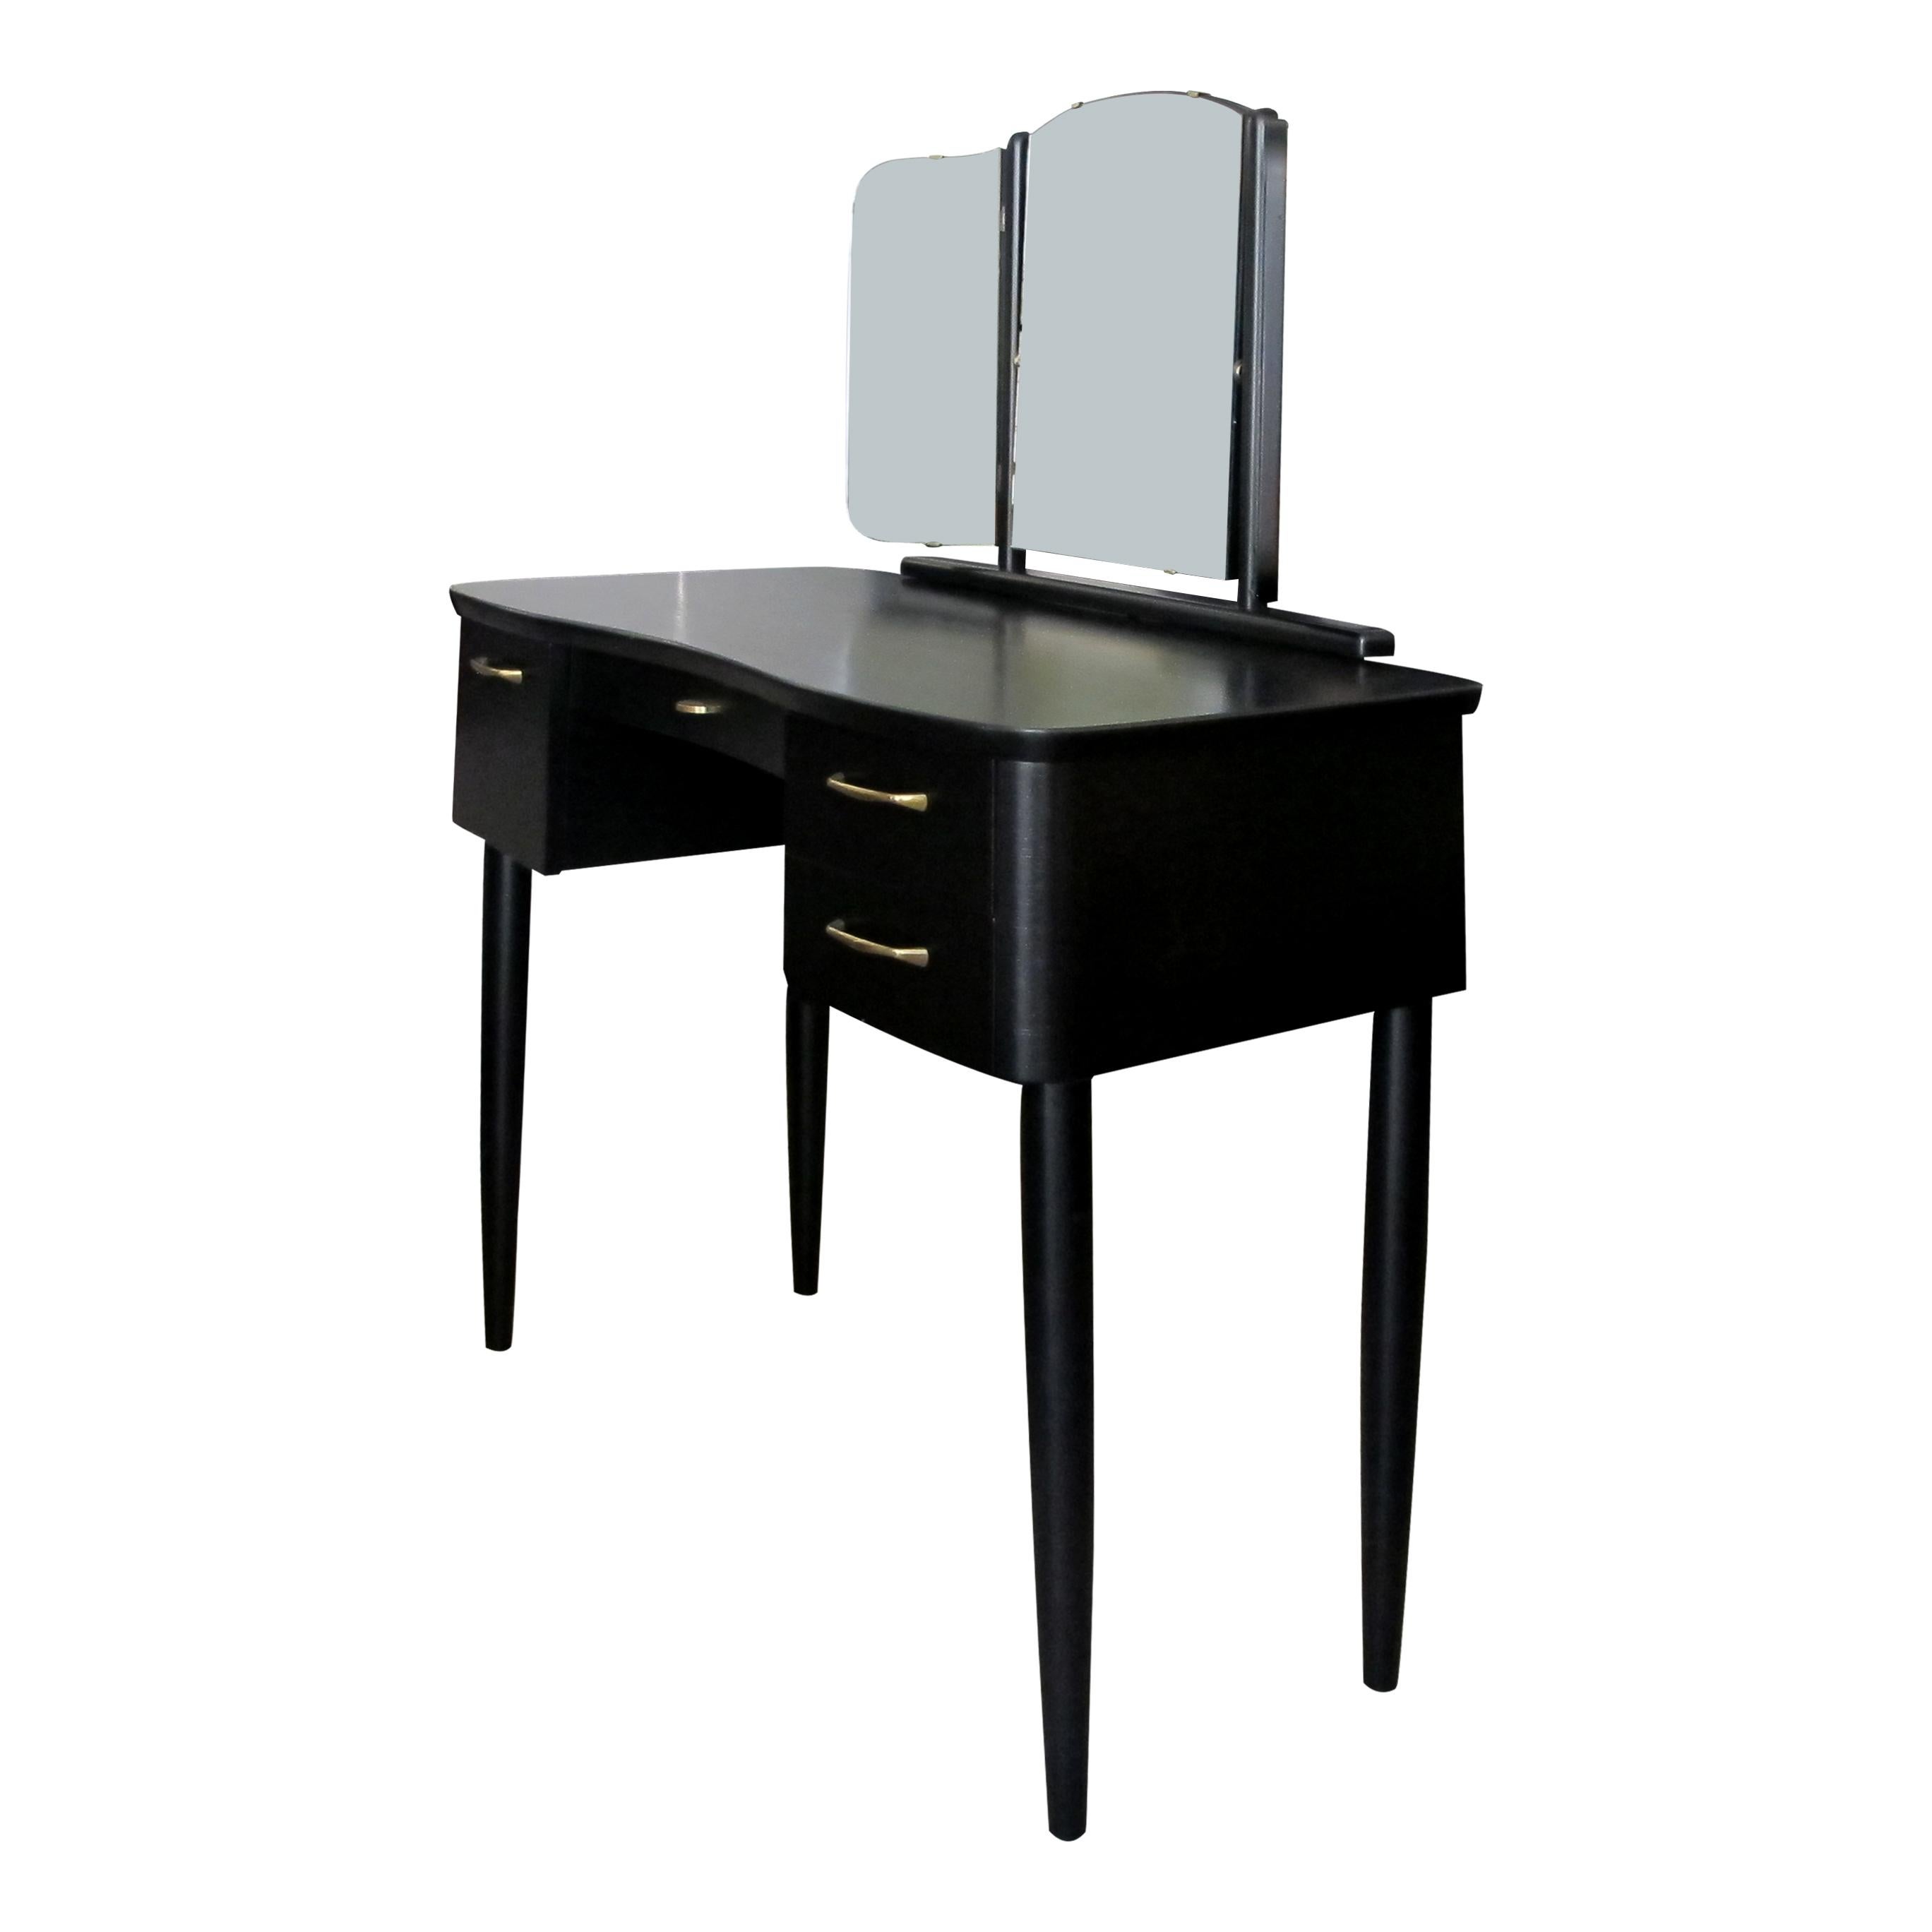 A 1940s Ebonised Scandinavian dressing table with its original triptych mirror and original feature brass handles. The dressing table has a pair of identical drawers on the right hand side, a deep single drawer on the left and a shallow central